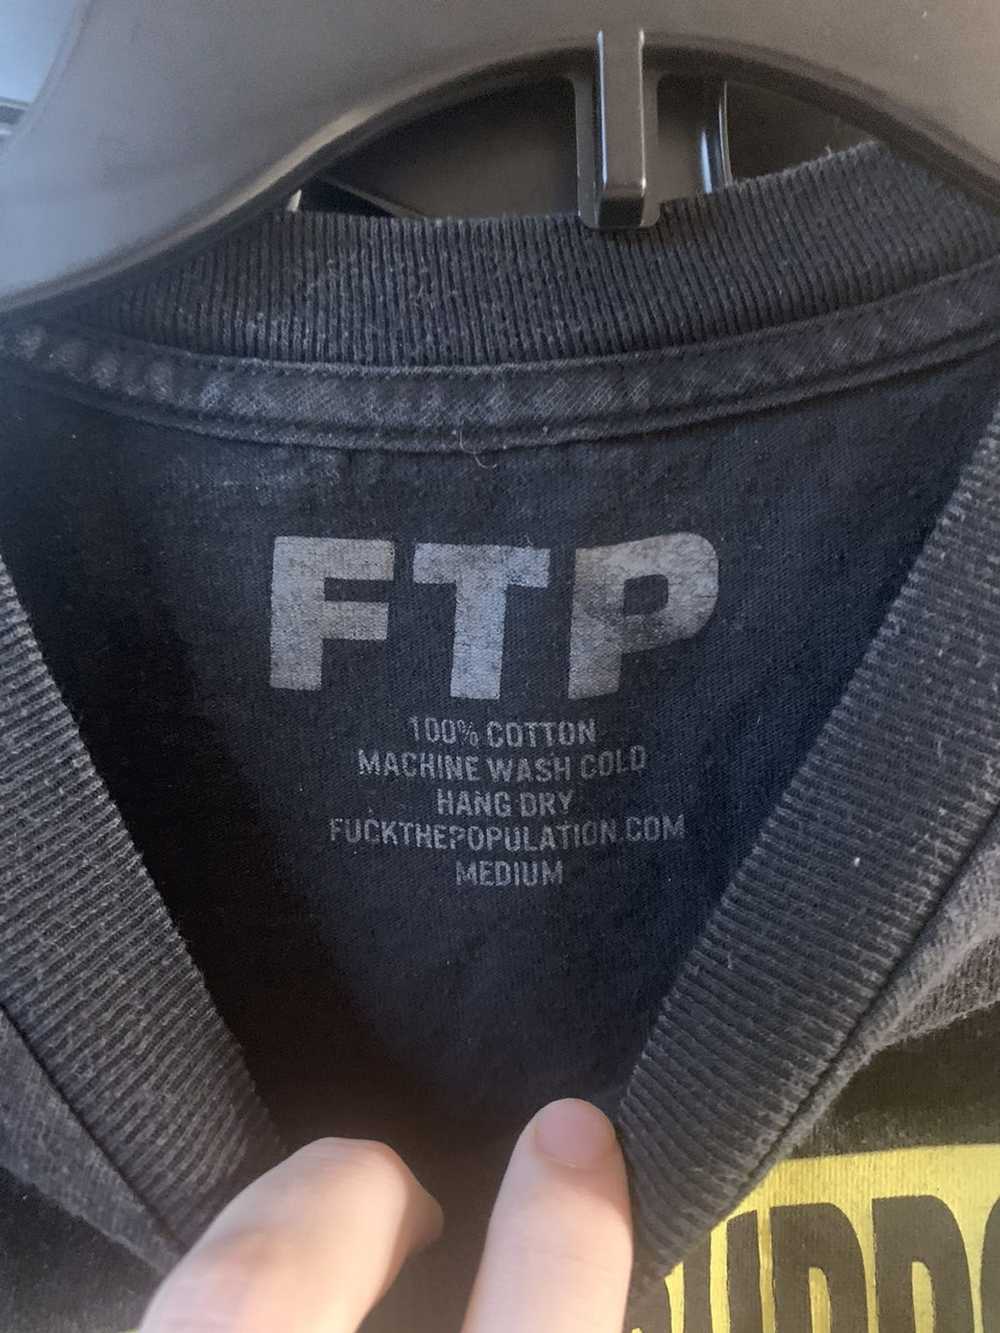 Fuck The Population FTP Child Support Tee - image 3